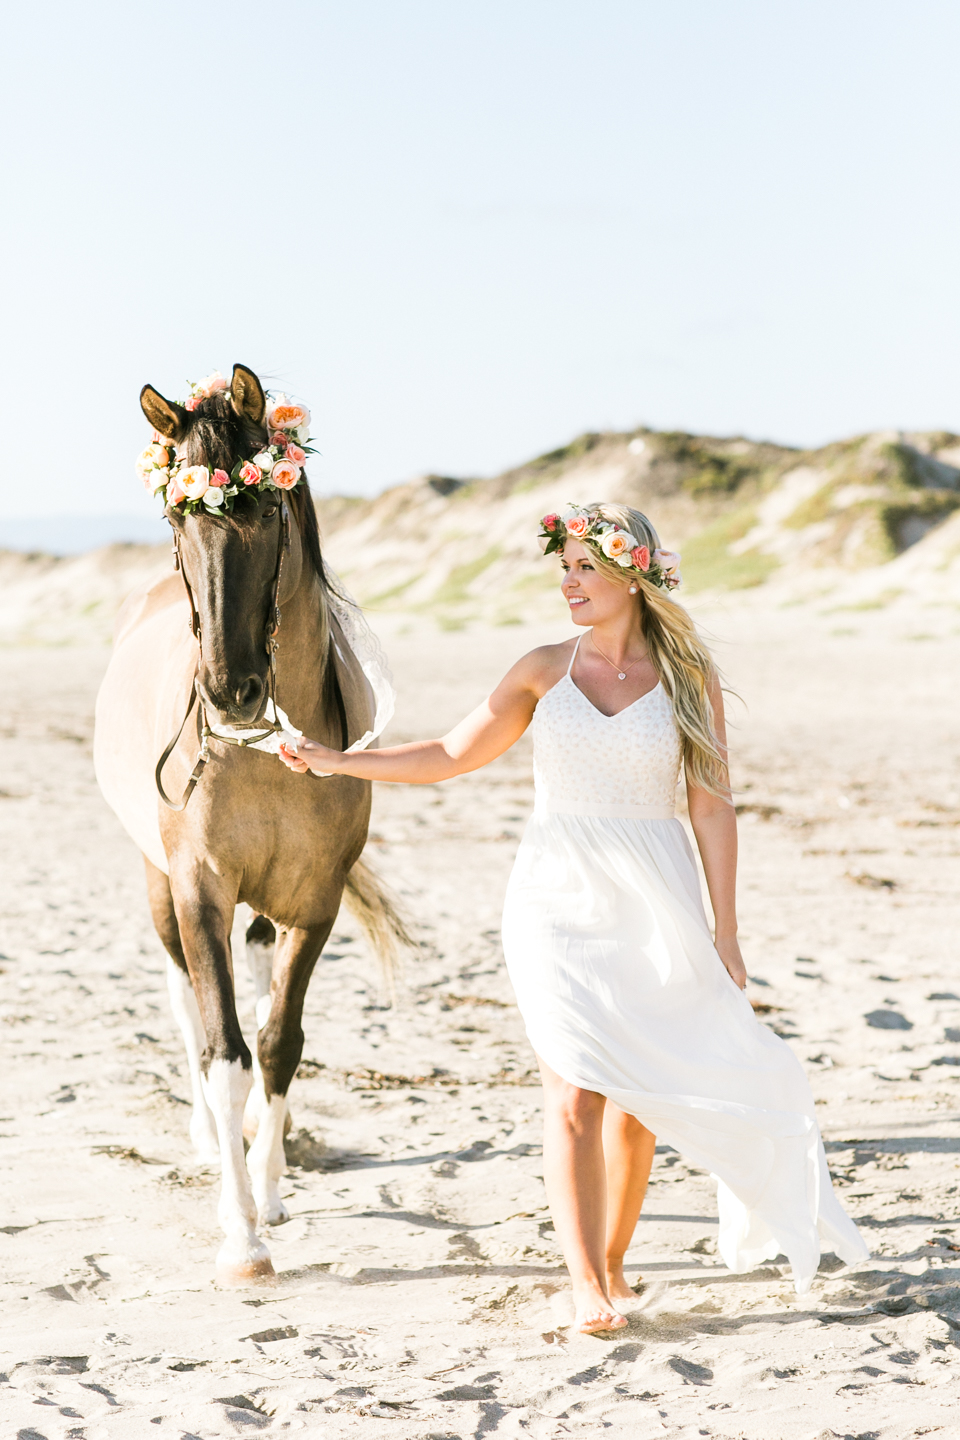 bohemian rustic beach horse engagement session, beach engagement session, engagement session with a horse, flower crown, sexy engagement session, lace tent, guitar, flower crown on horse, trash the dress, horse and bride running in water, austin and ryan, engaged and inspired, holman ranch, beautiful couple, modcloth dress, bride walking her horse, moss landings, zmudowski Beach, monterey beach, bohemian wedding, jasmine lee photography